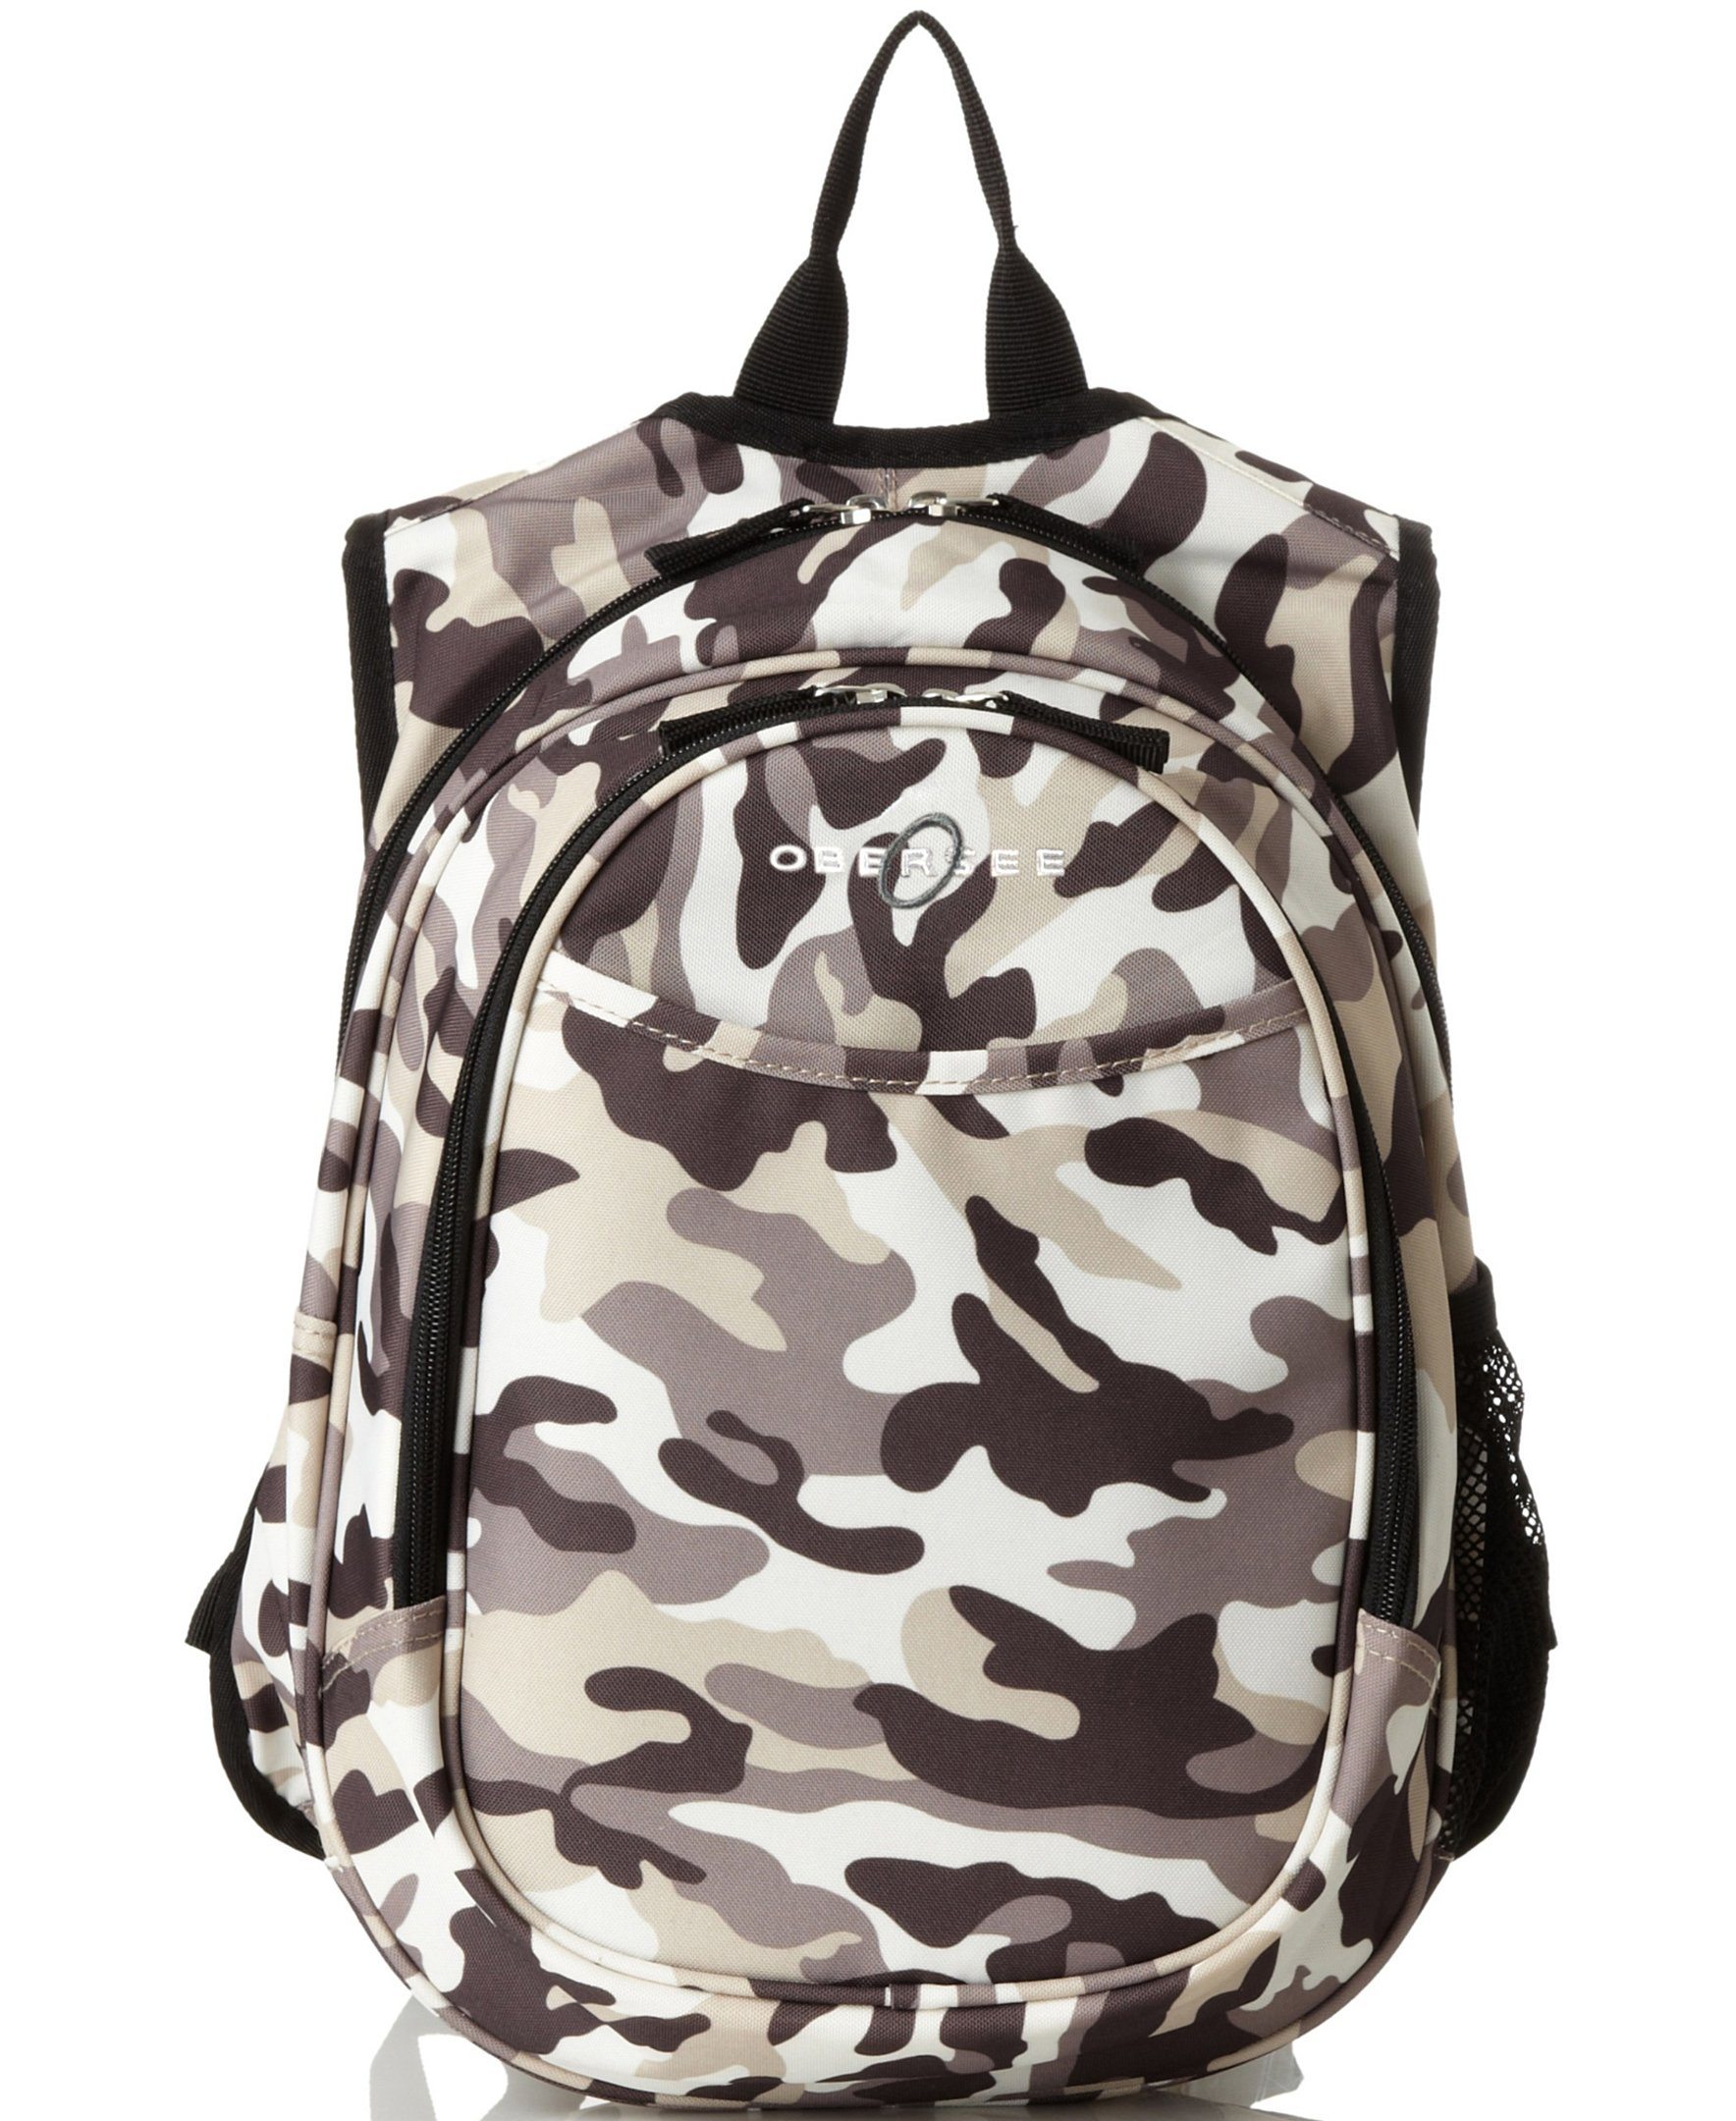 O3KCBP009 Obersee Mini Preschool All-in-One Backpack for Toddlers and Kids with integrated Insulated Cooler | Camo Camouflage - image 1 of 6